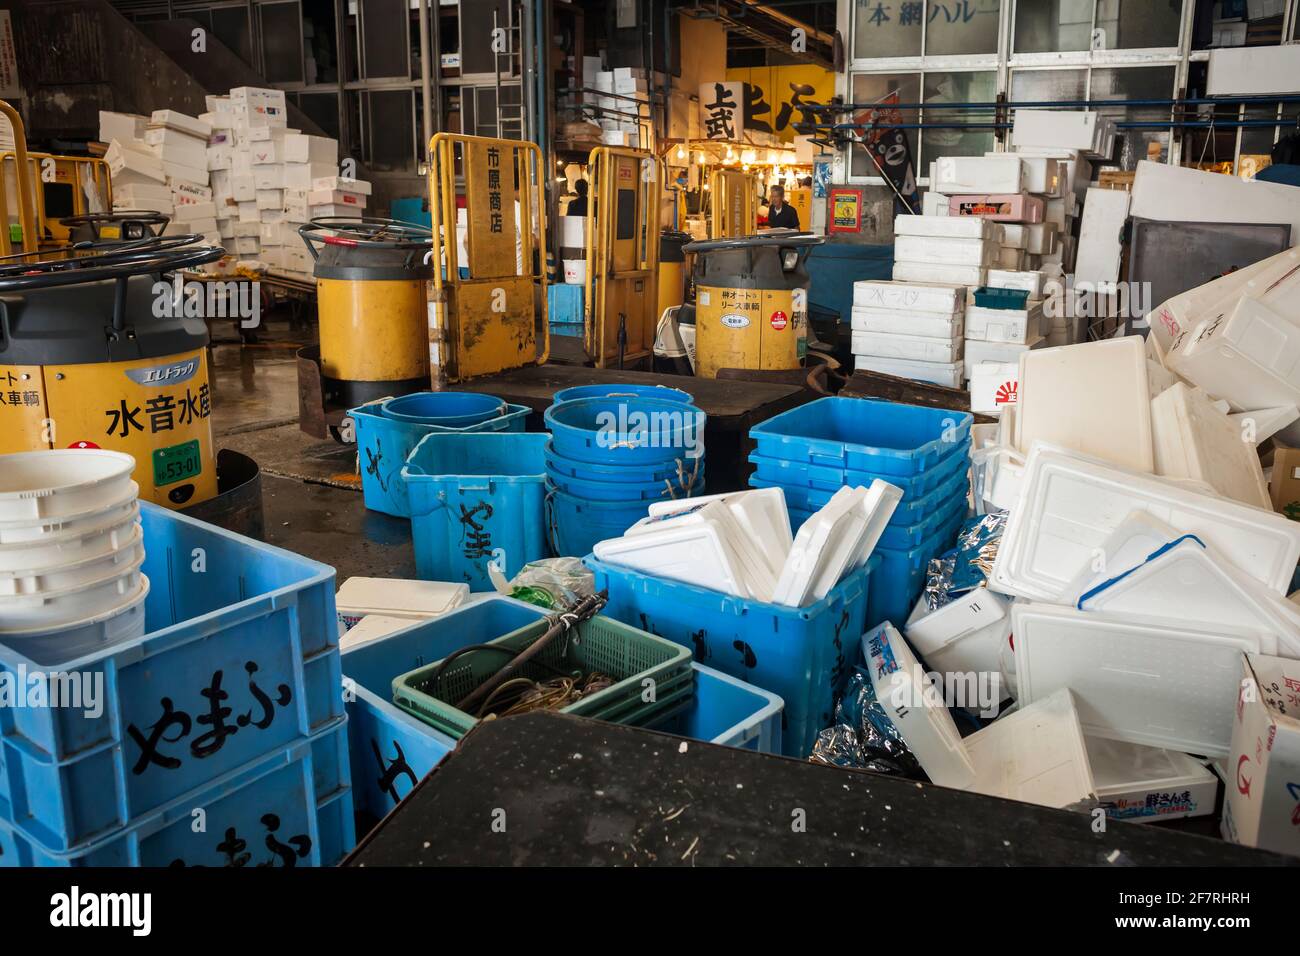 Lots of isothermal boxes, buckets and parked fork lift trucks in the loading and unloading zone of the Tokyo's Tsukiji inner fish market, Tokyo, Japan Stock Photo